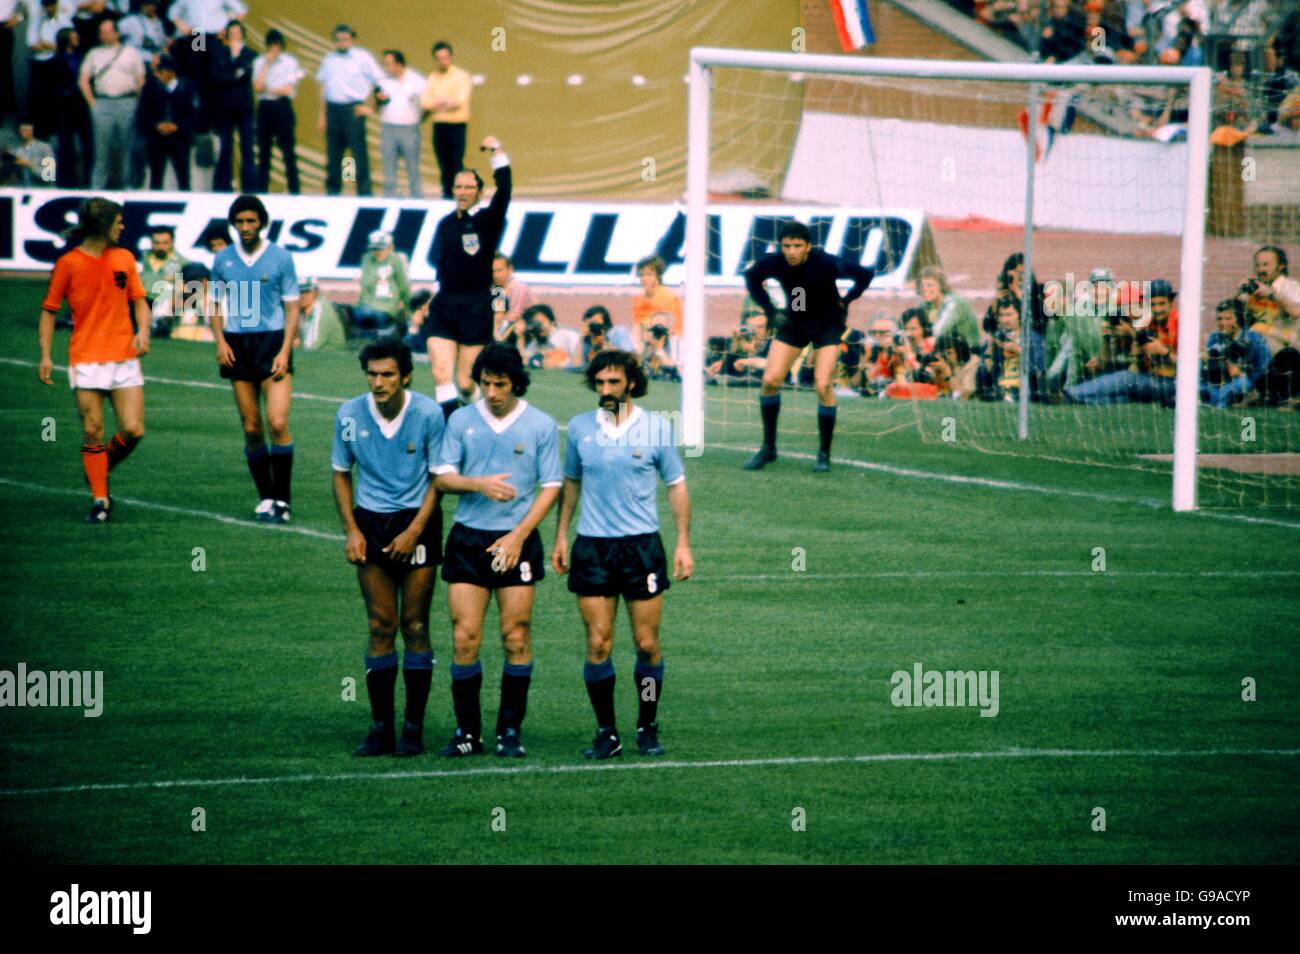 Soccer - World Cup West Germany 1974 - Group Three - Holland v Uruguay. The Uruguay wall (l-r), Pedro Rocha, Victor Esparrago and Ricardo Pavoni, defend a free kick, watched by goalkeeper Ladislao Mazurkiewicz (r) Stock Photo